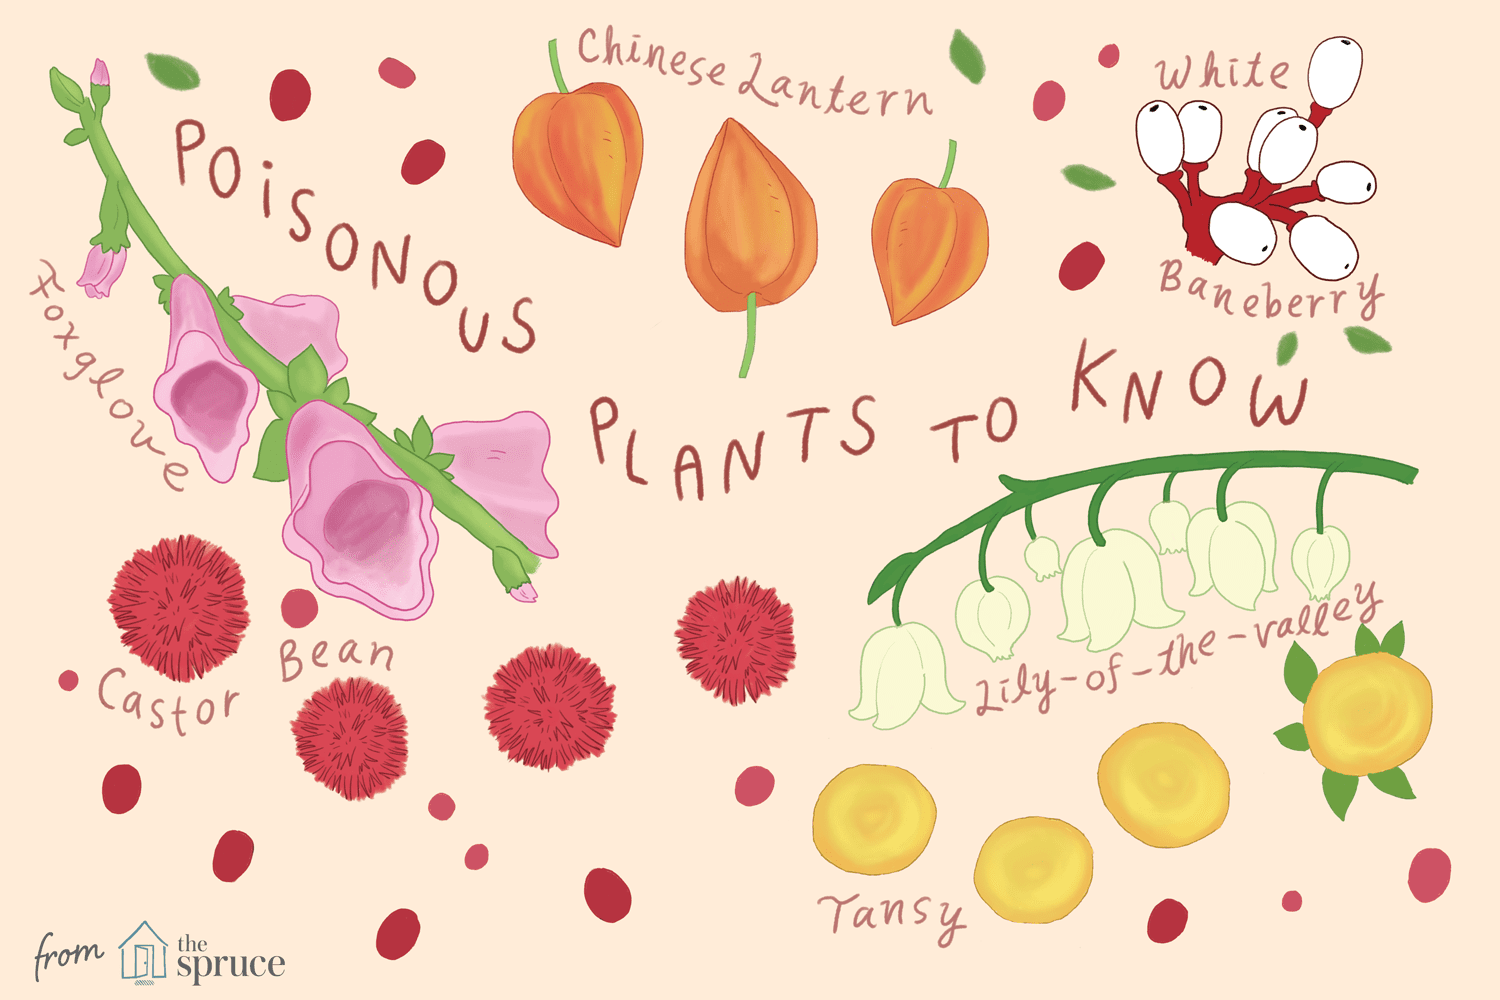 15 Common Plants You Might Not Realize Are Poisonous